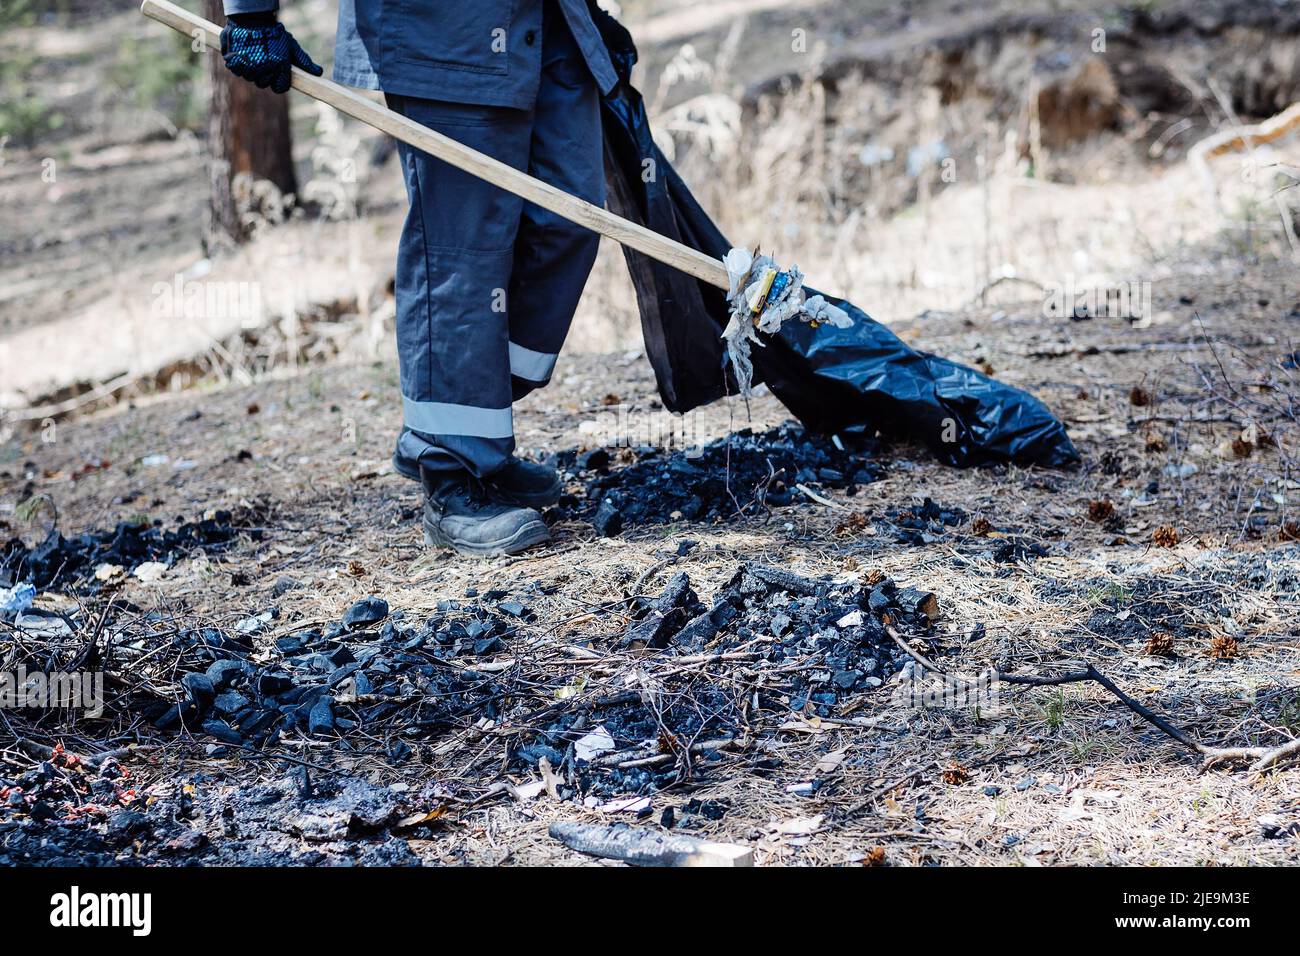 Man in overalls collects garbage and waste in forest. Ecological problem of pollution of nature. Volunteer with plastic bag cleans forest on summer day. Stock Photo